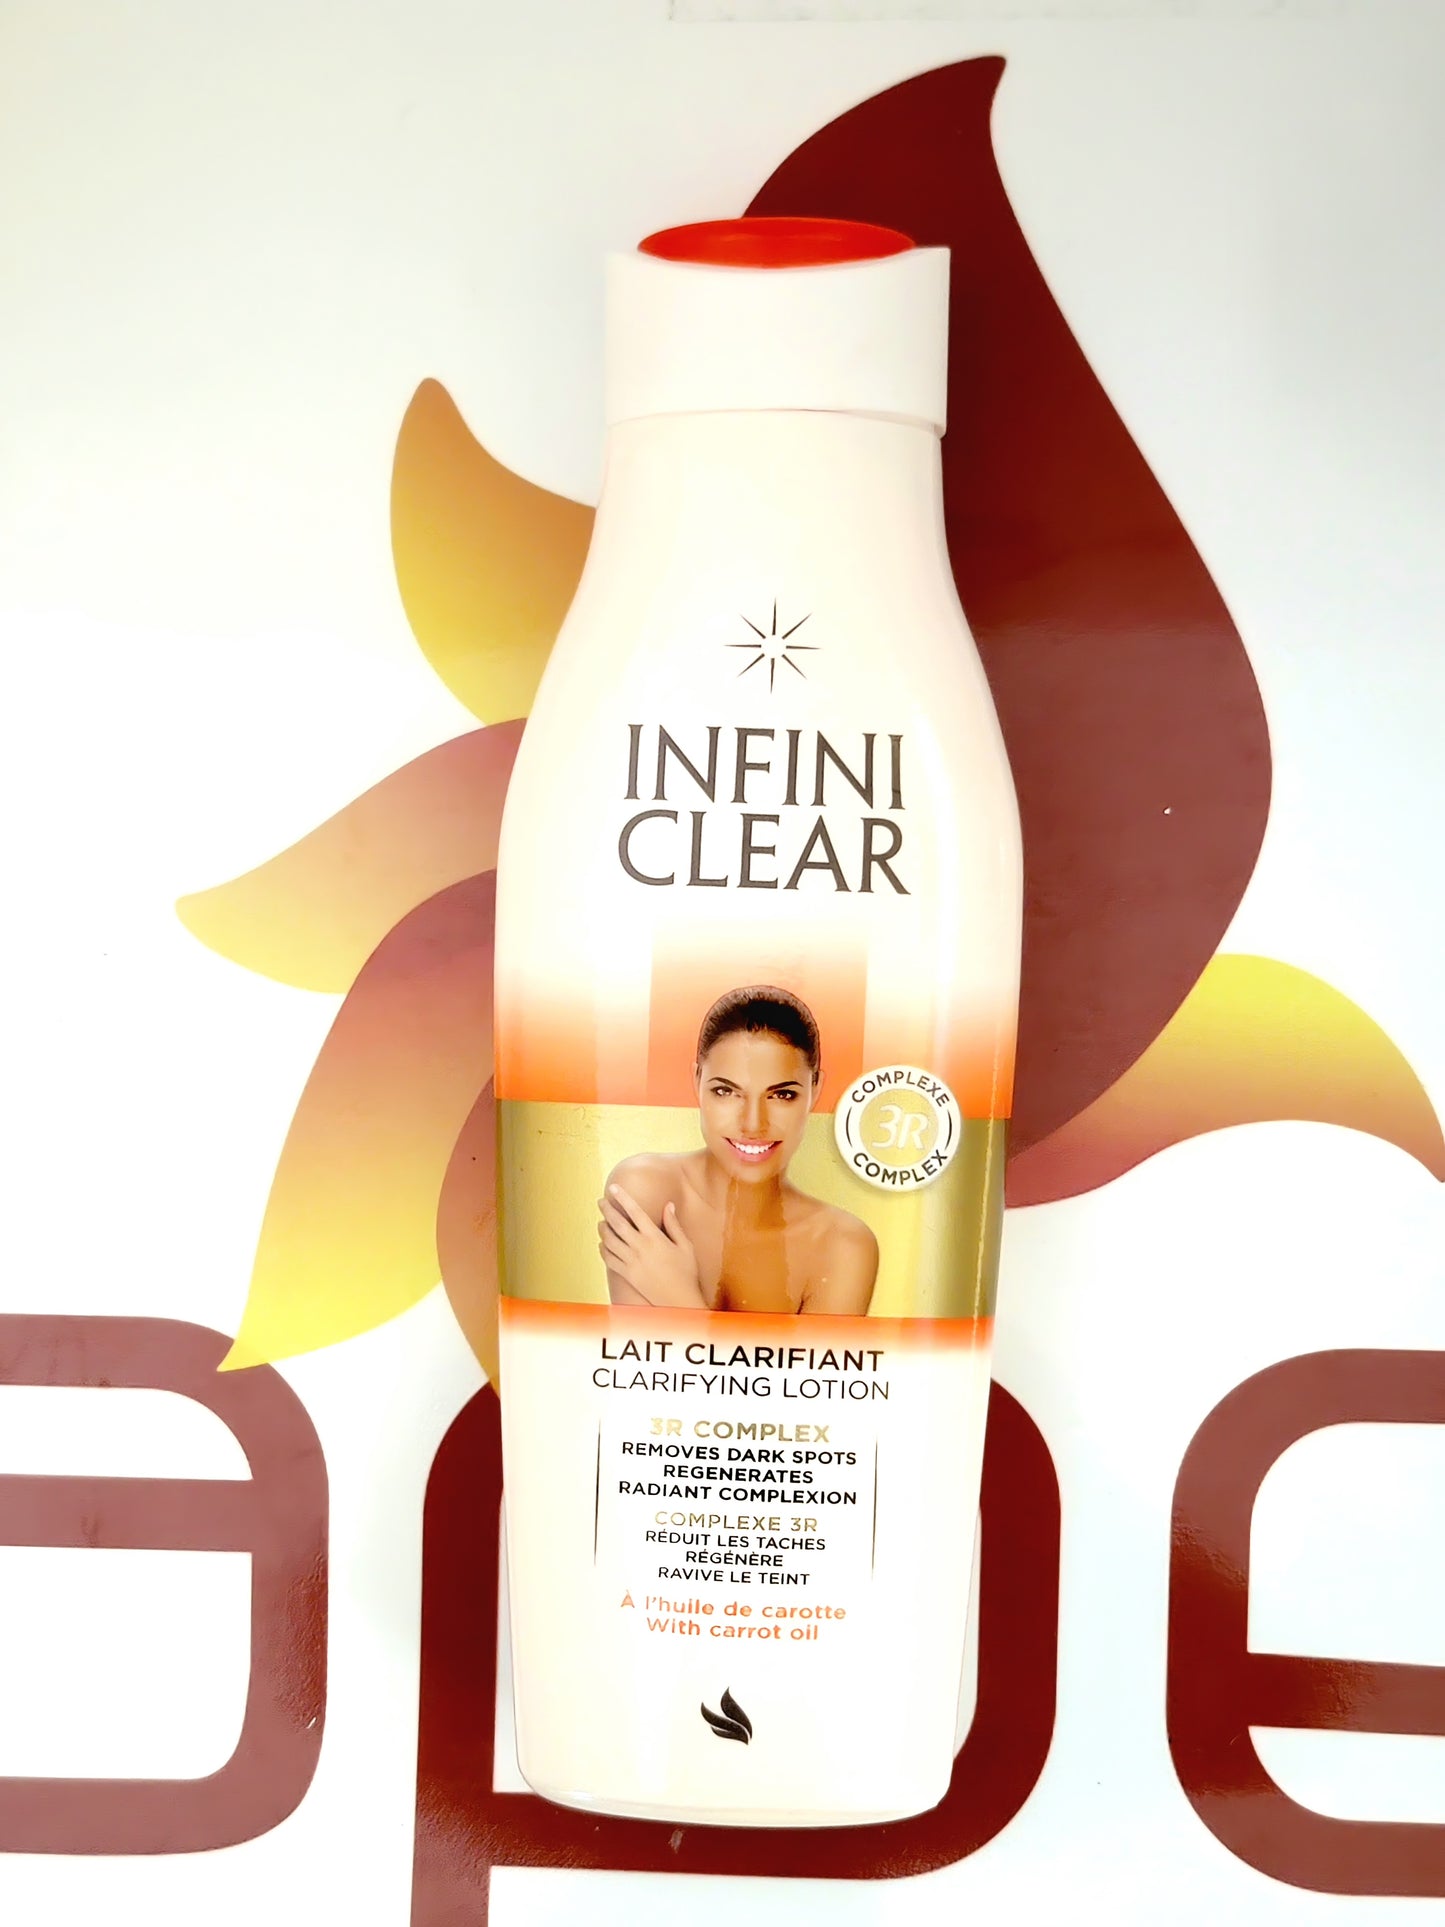 Infini Clear Clarifying Lotion 3R Complex 500ml